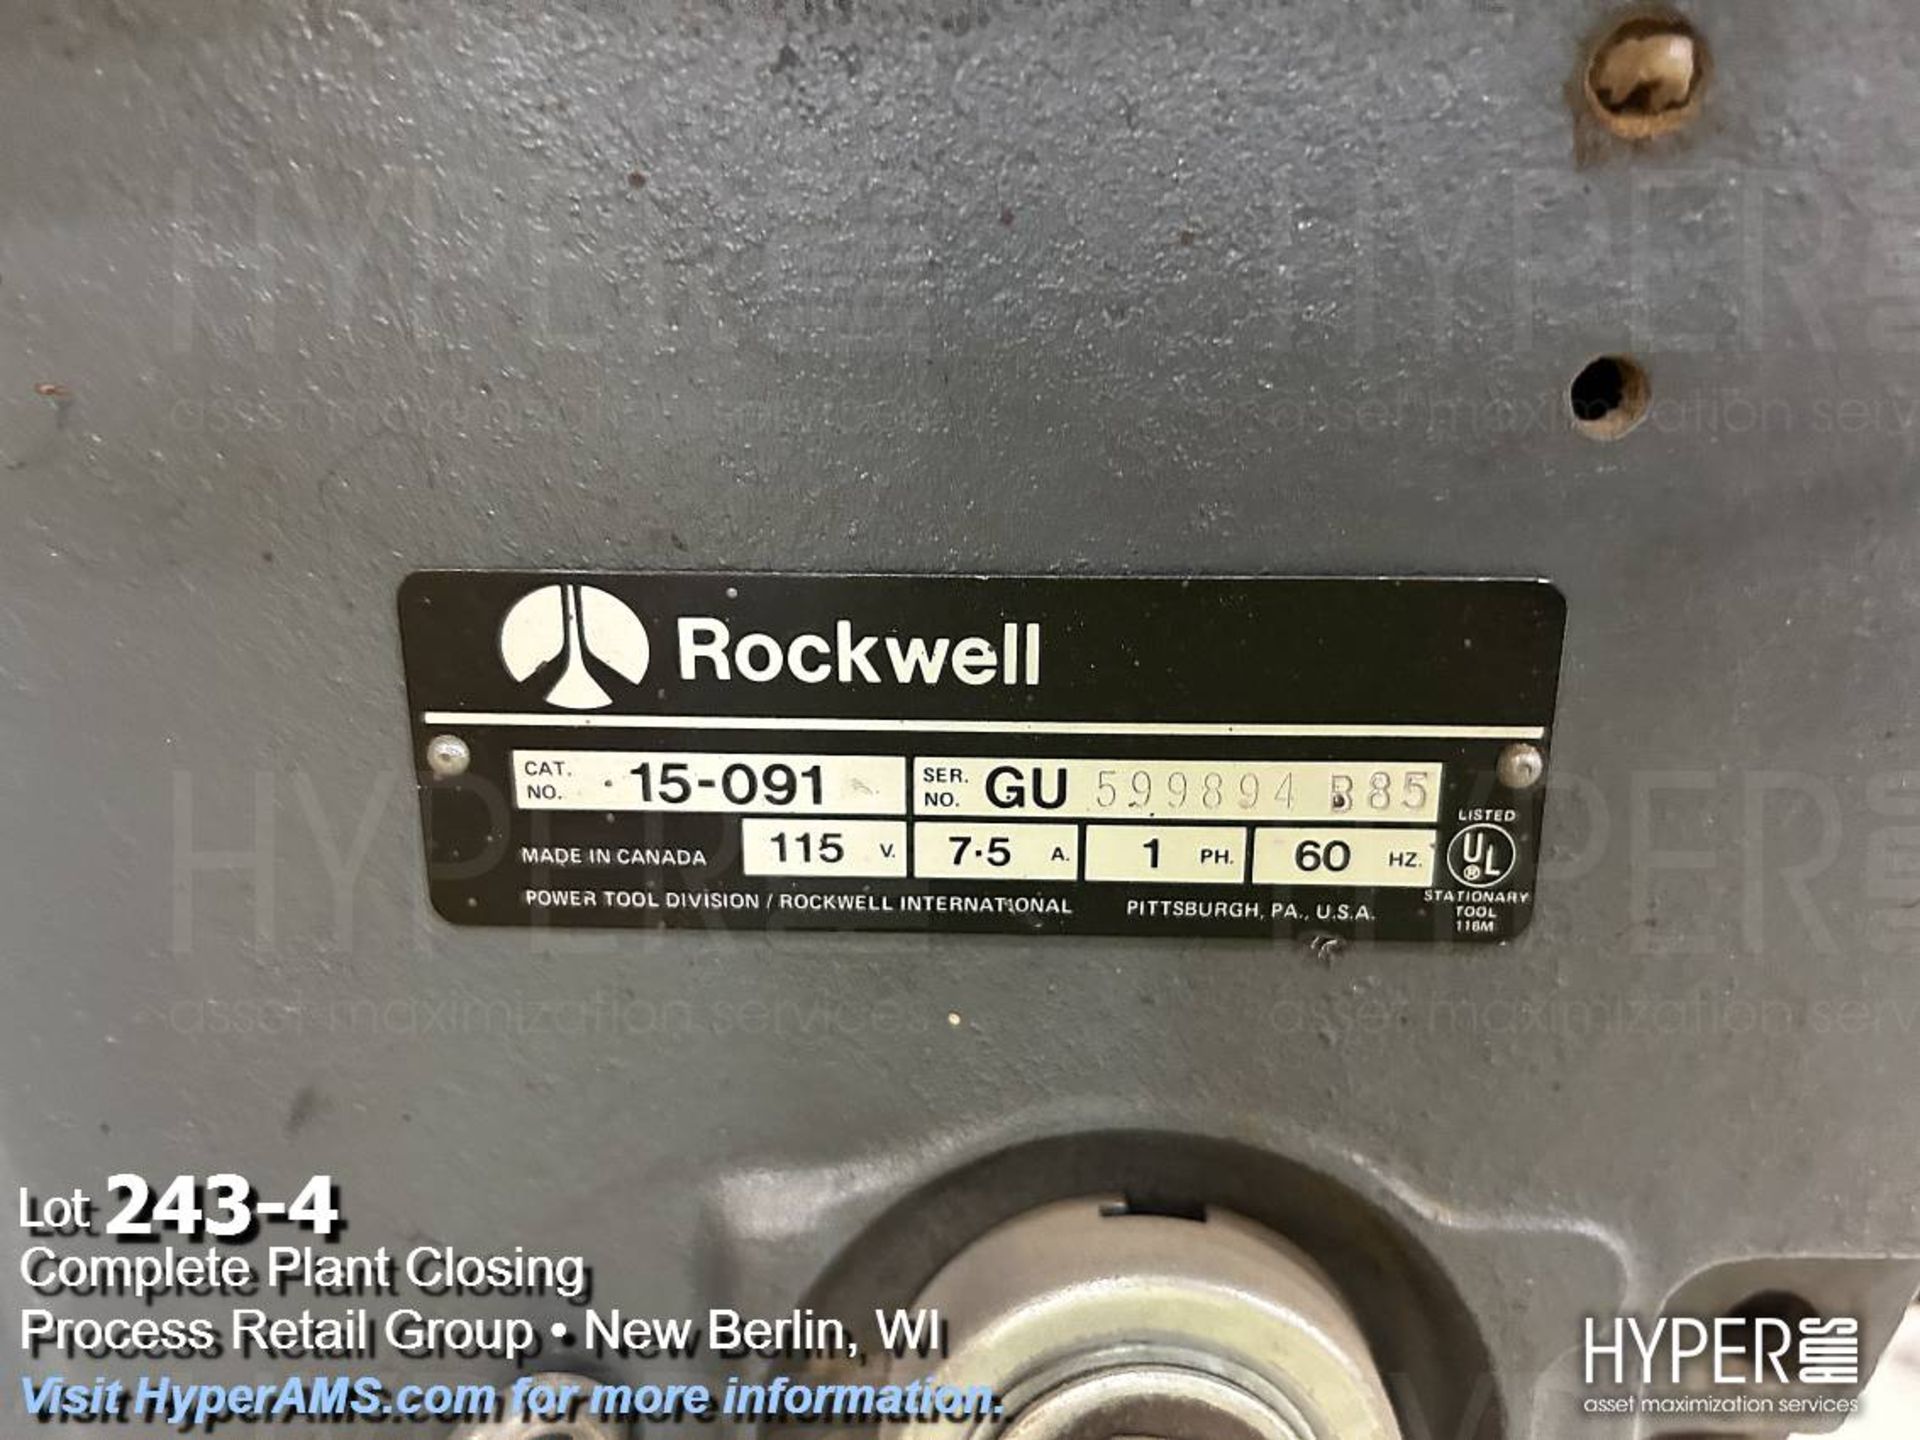 Rockwell 15-091 drill press - Image 4 of 5